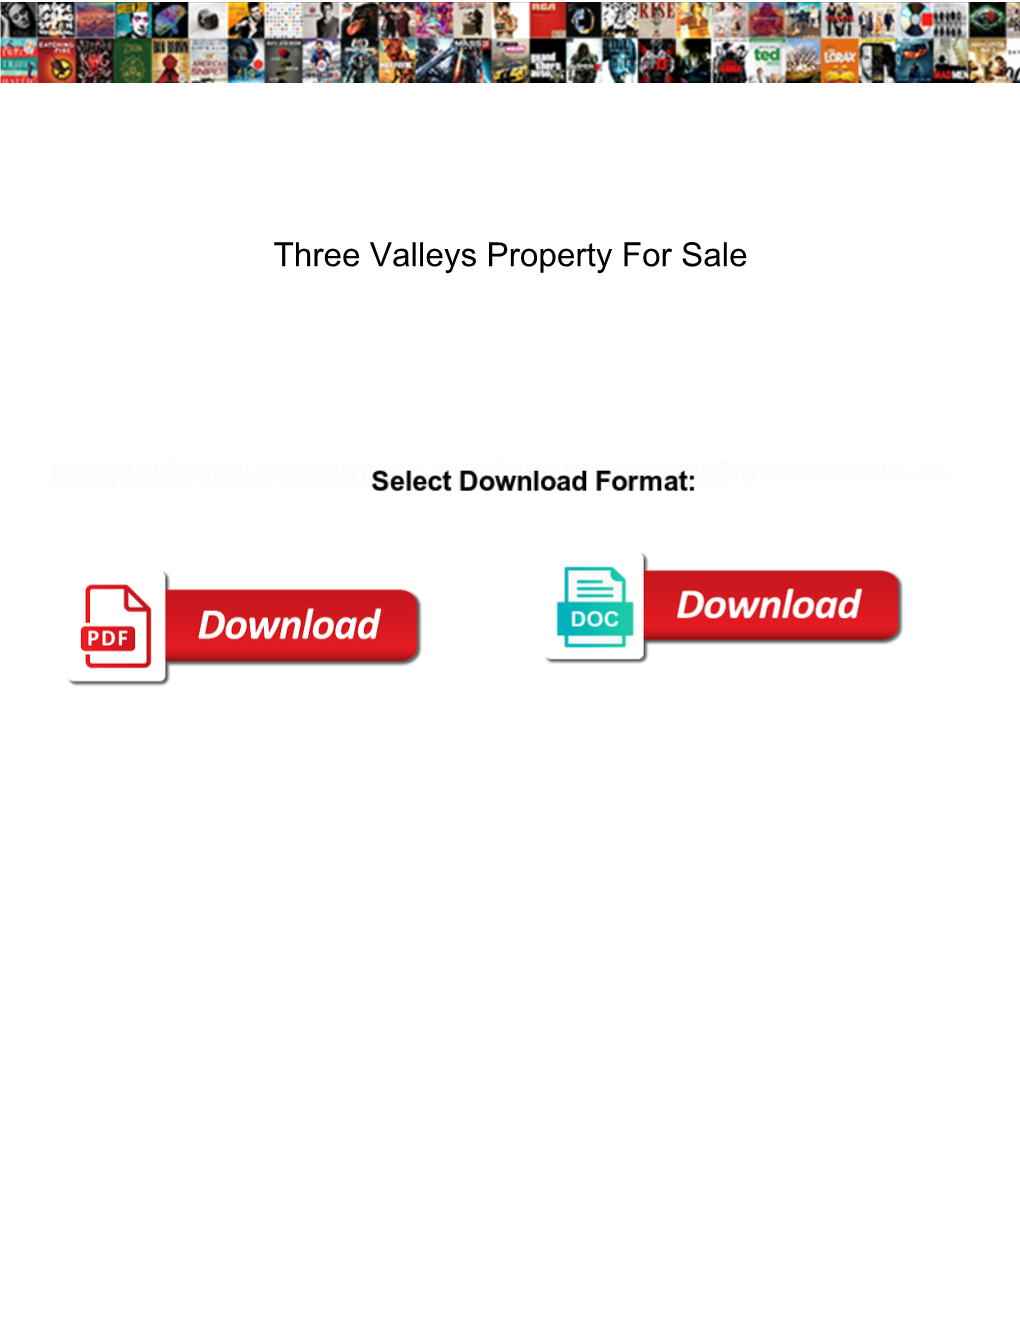 Three Valleys Property for Sale